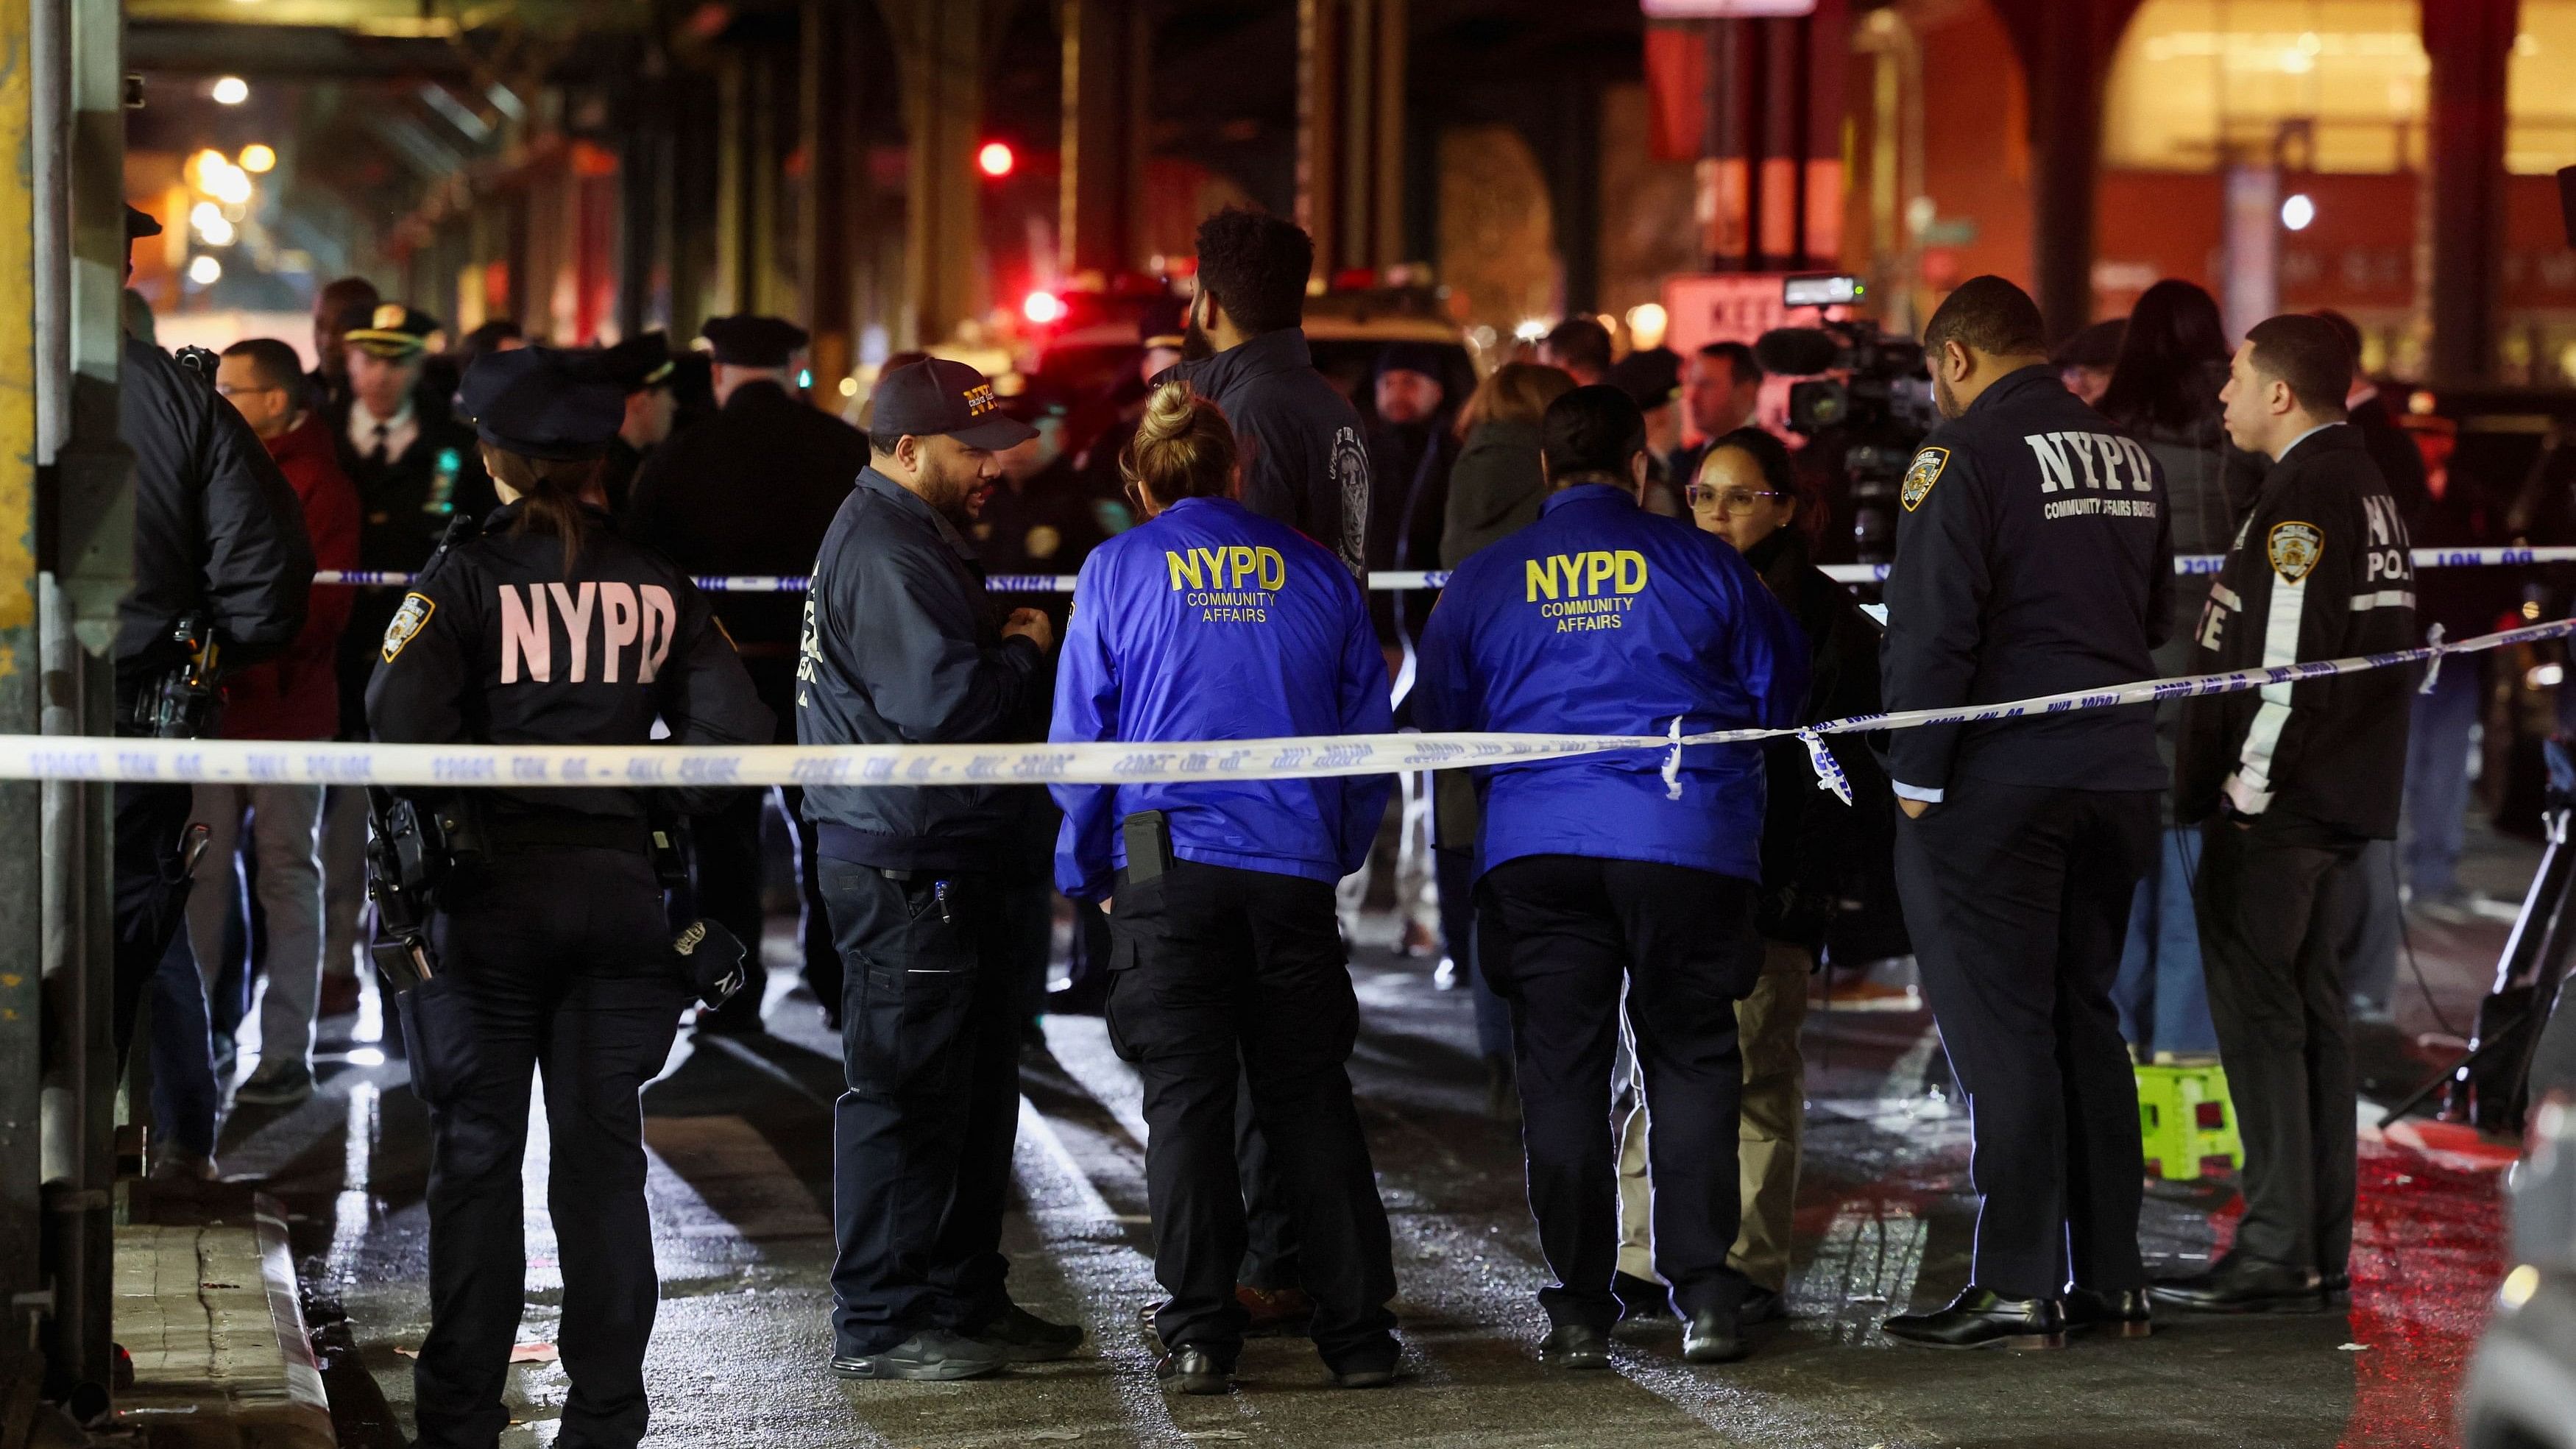 <div class="paragraphs"><p>Members of the New York Police Department (NYPD) investigate the scene of a shooting at the Mount Eden Avenue subway station in the Bronx borough of New York City, US.</p></div>